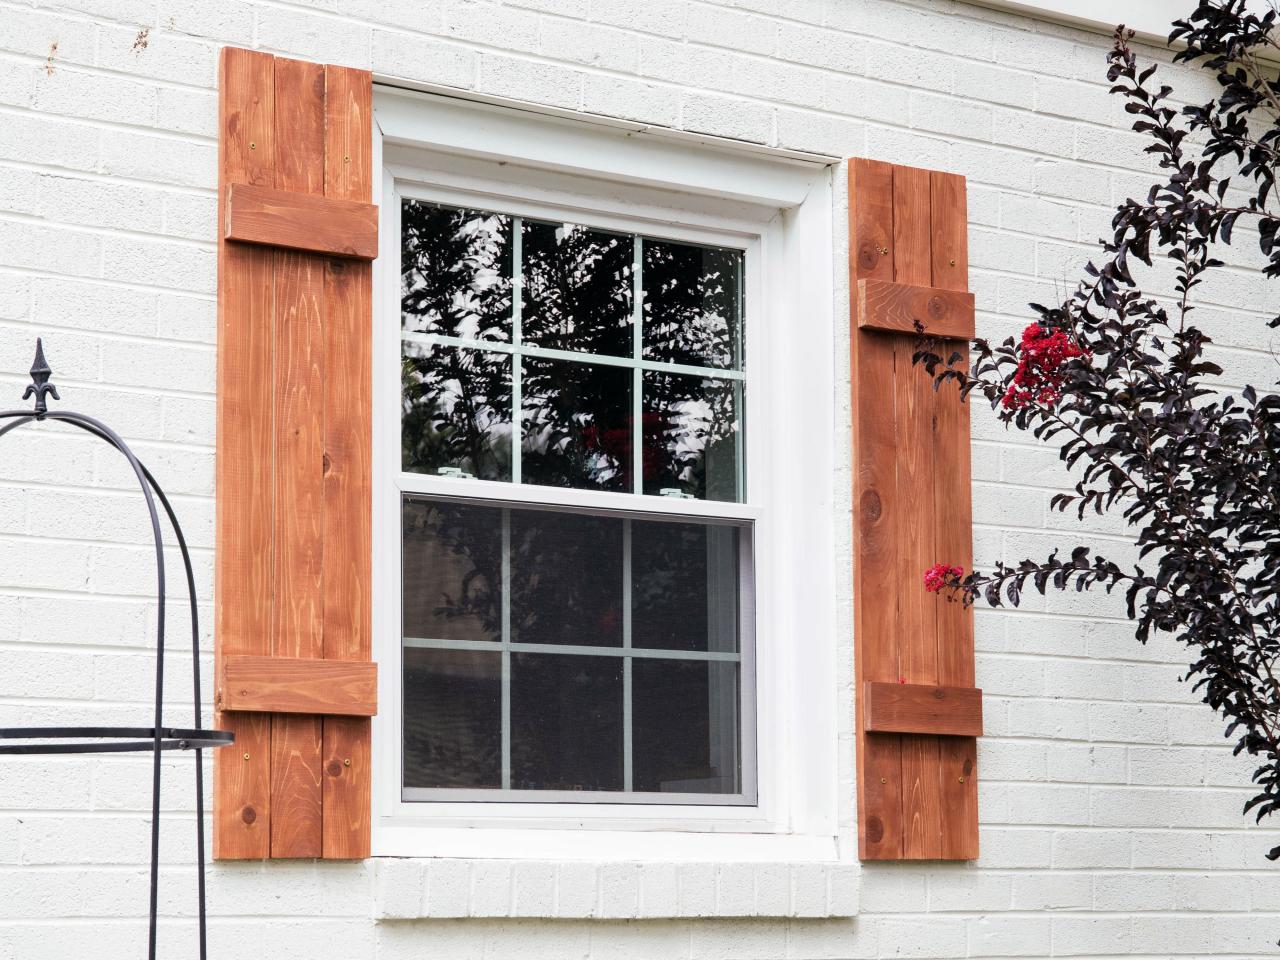 How To Make Outdoor Shutters For Windows